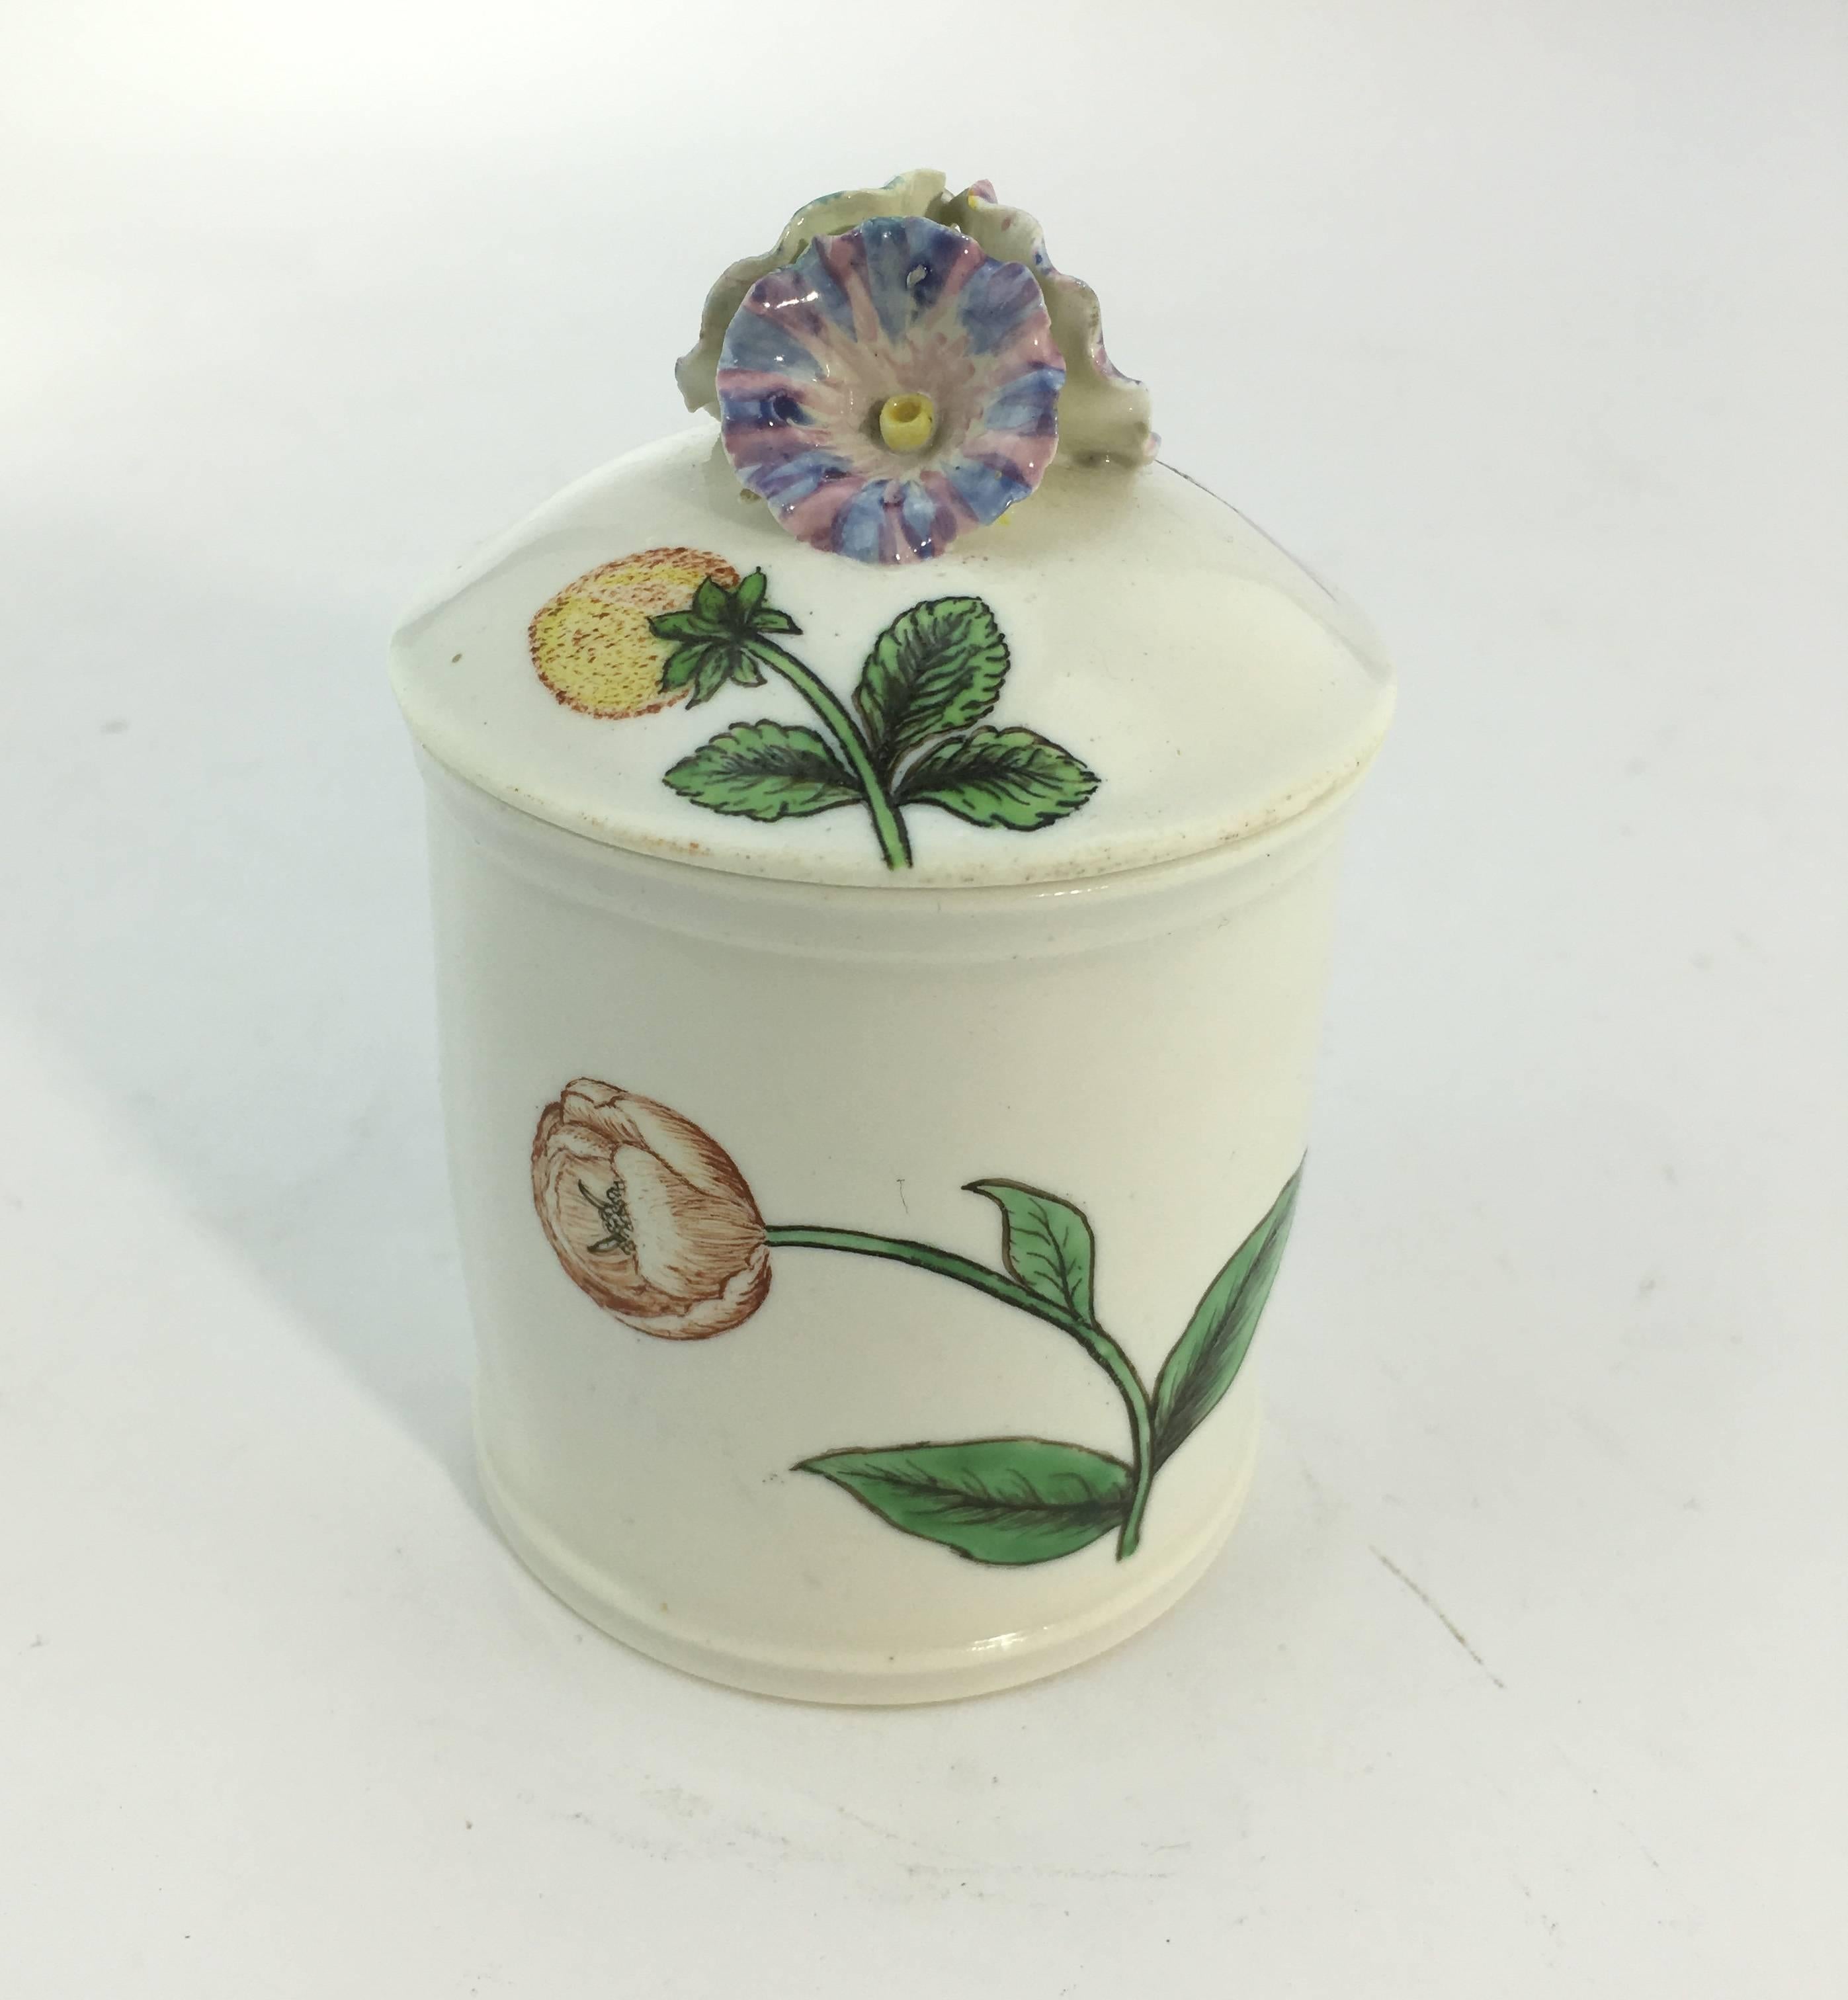 Baroque Chantilly Pomade Pot with Rare Holzschnittblumen 'Woodcut Flowers' after Meissen